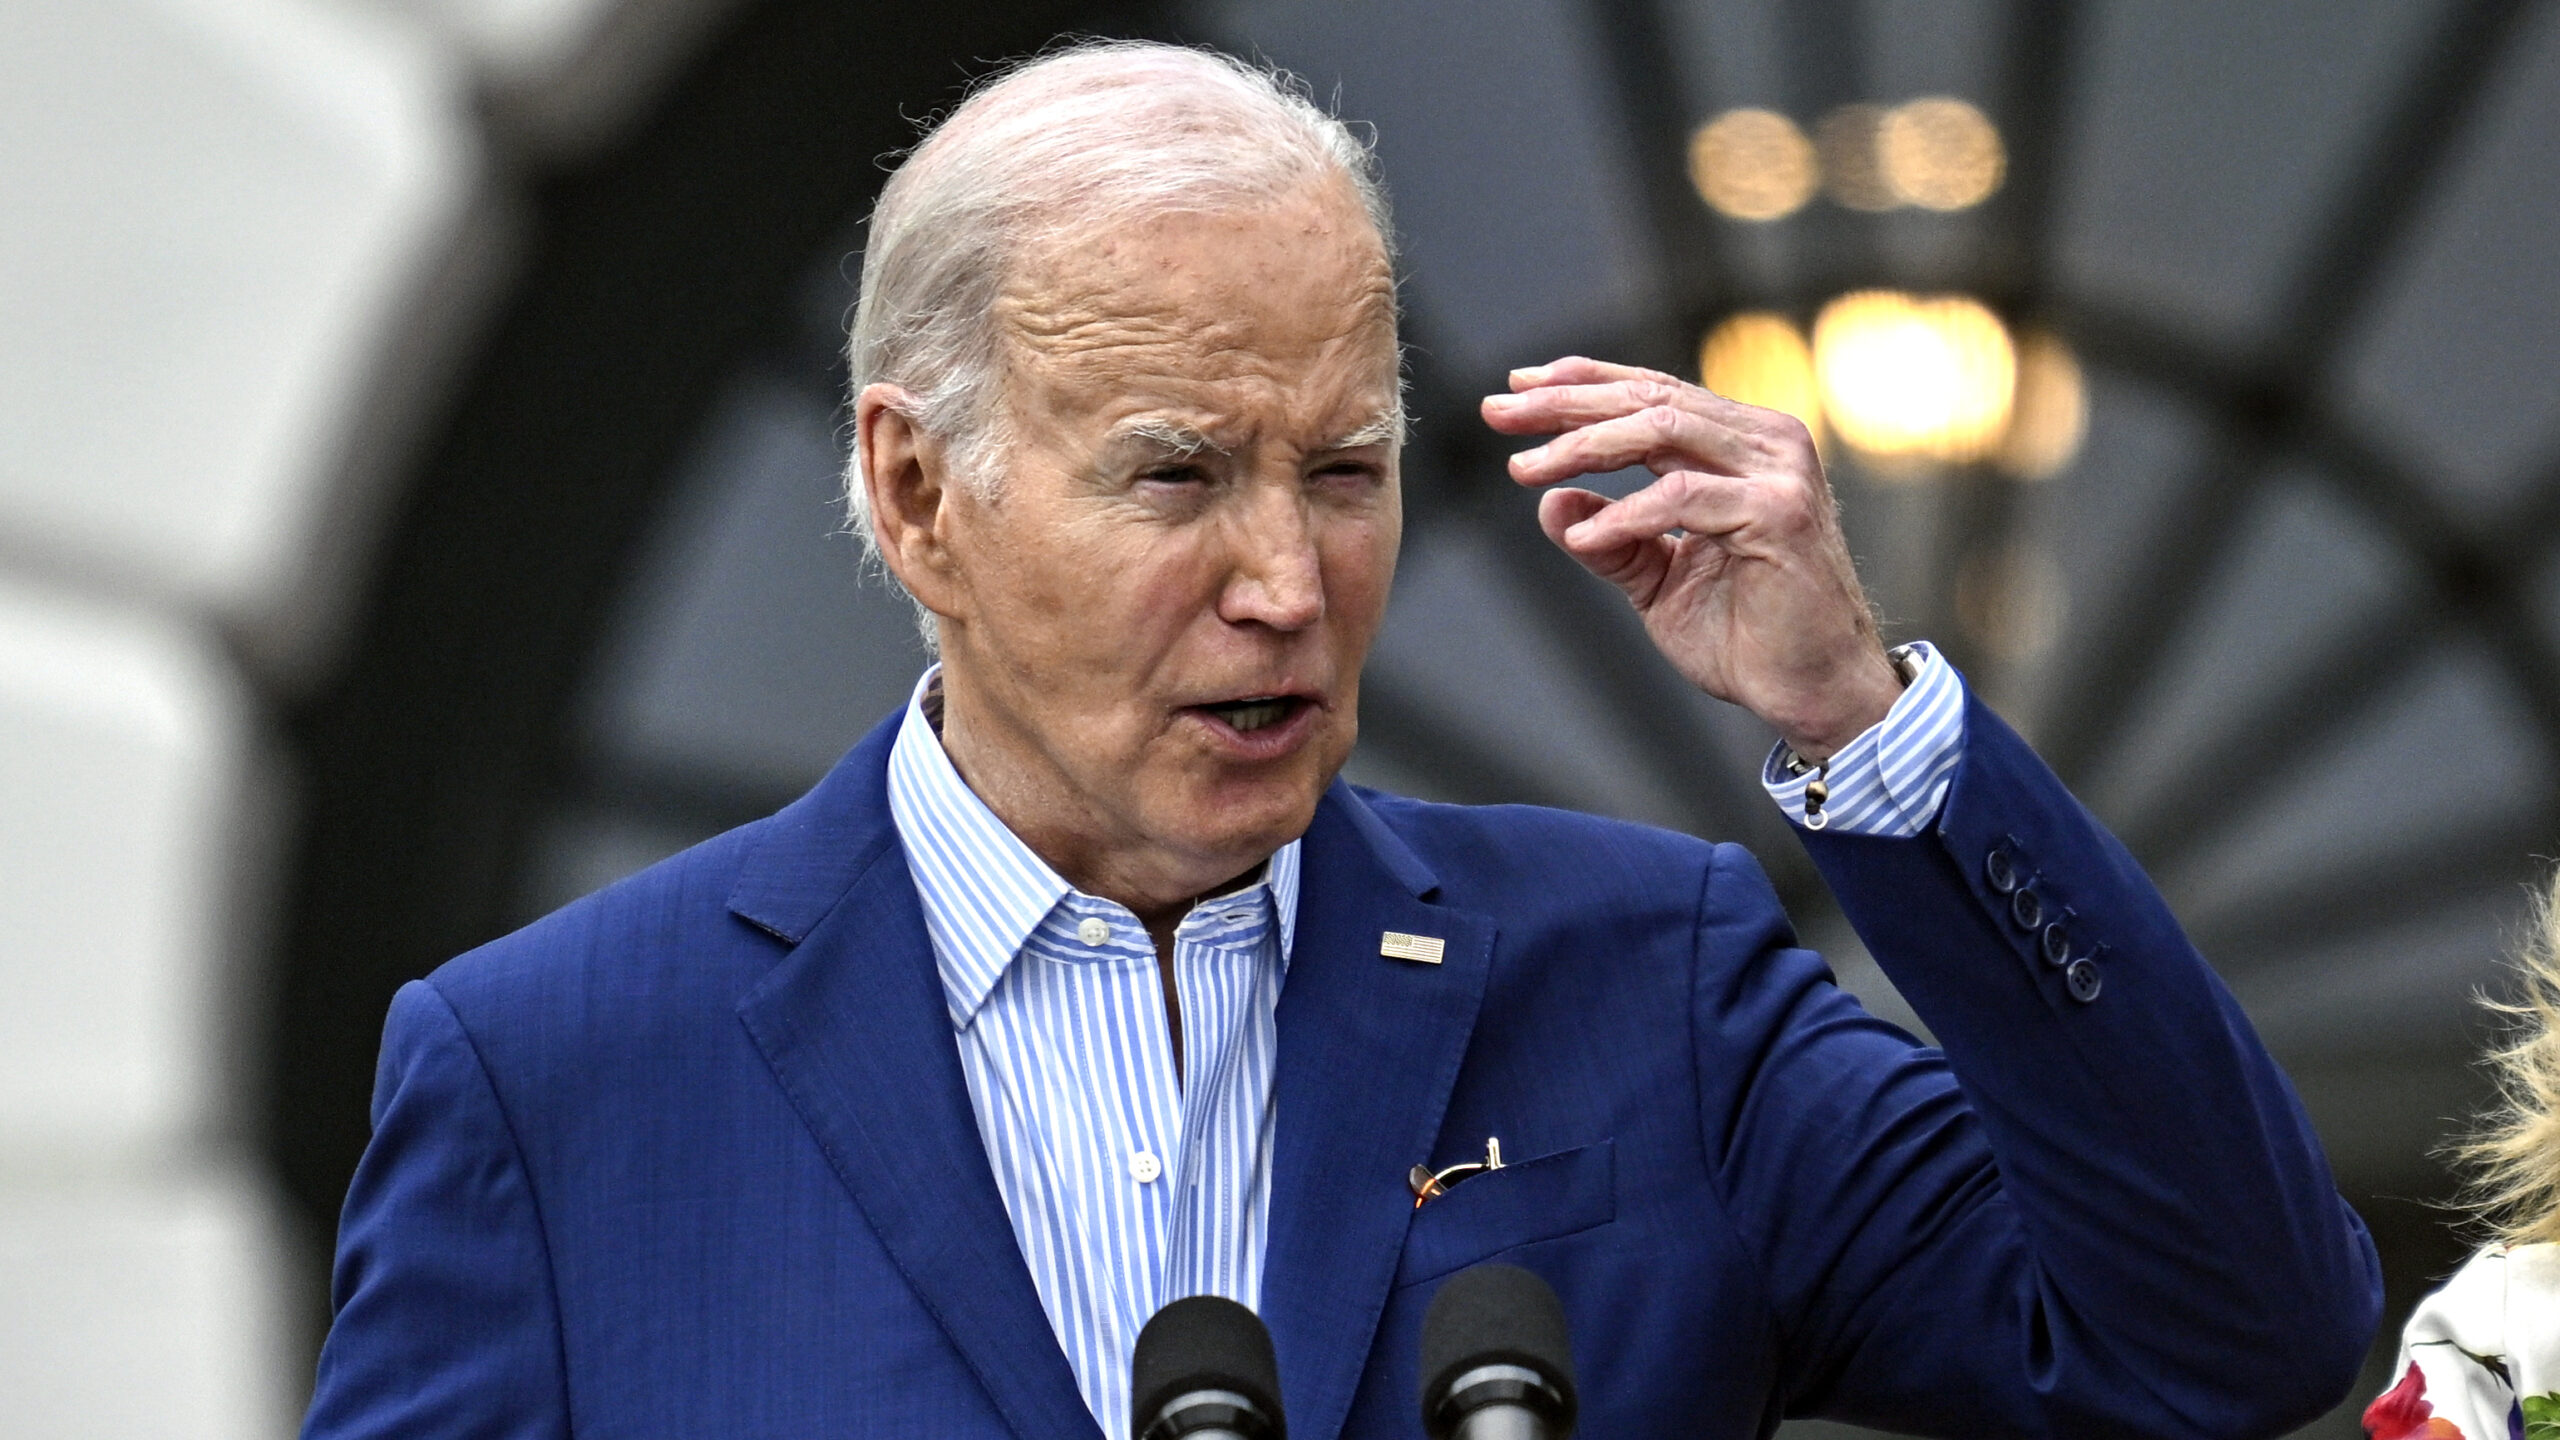 Study: Biden’s Policies Against Oil and Gas Result in 0 Billion GDP Loss in the U.S